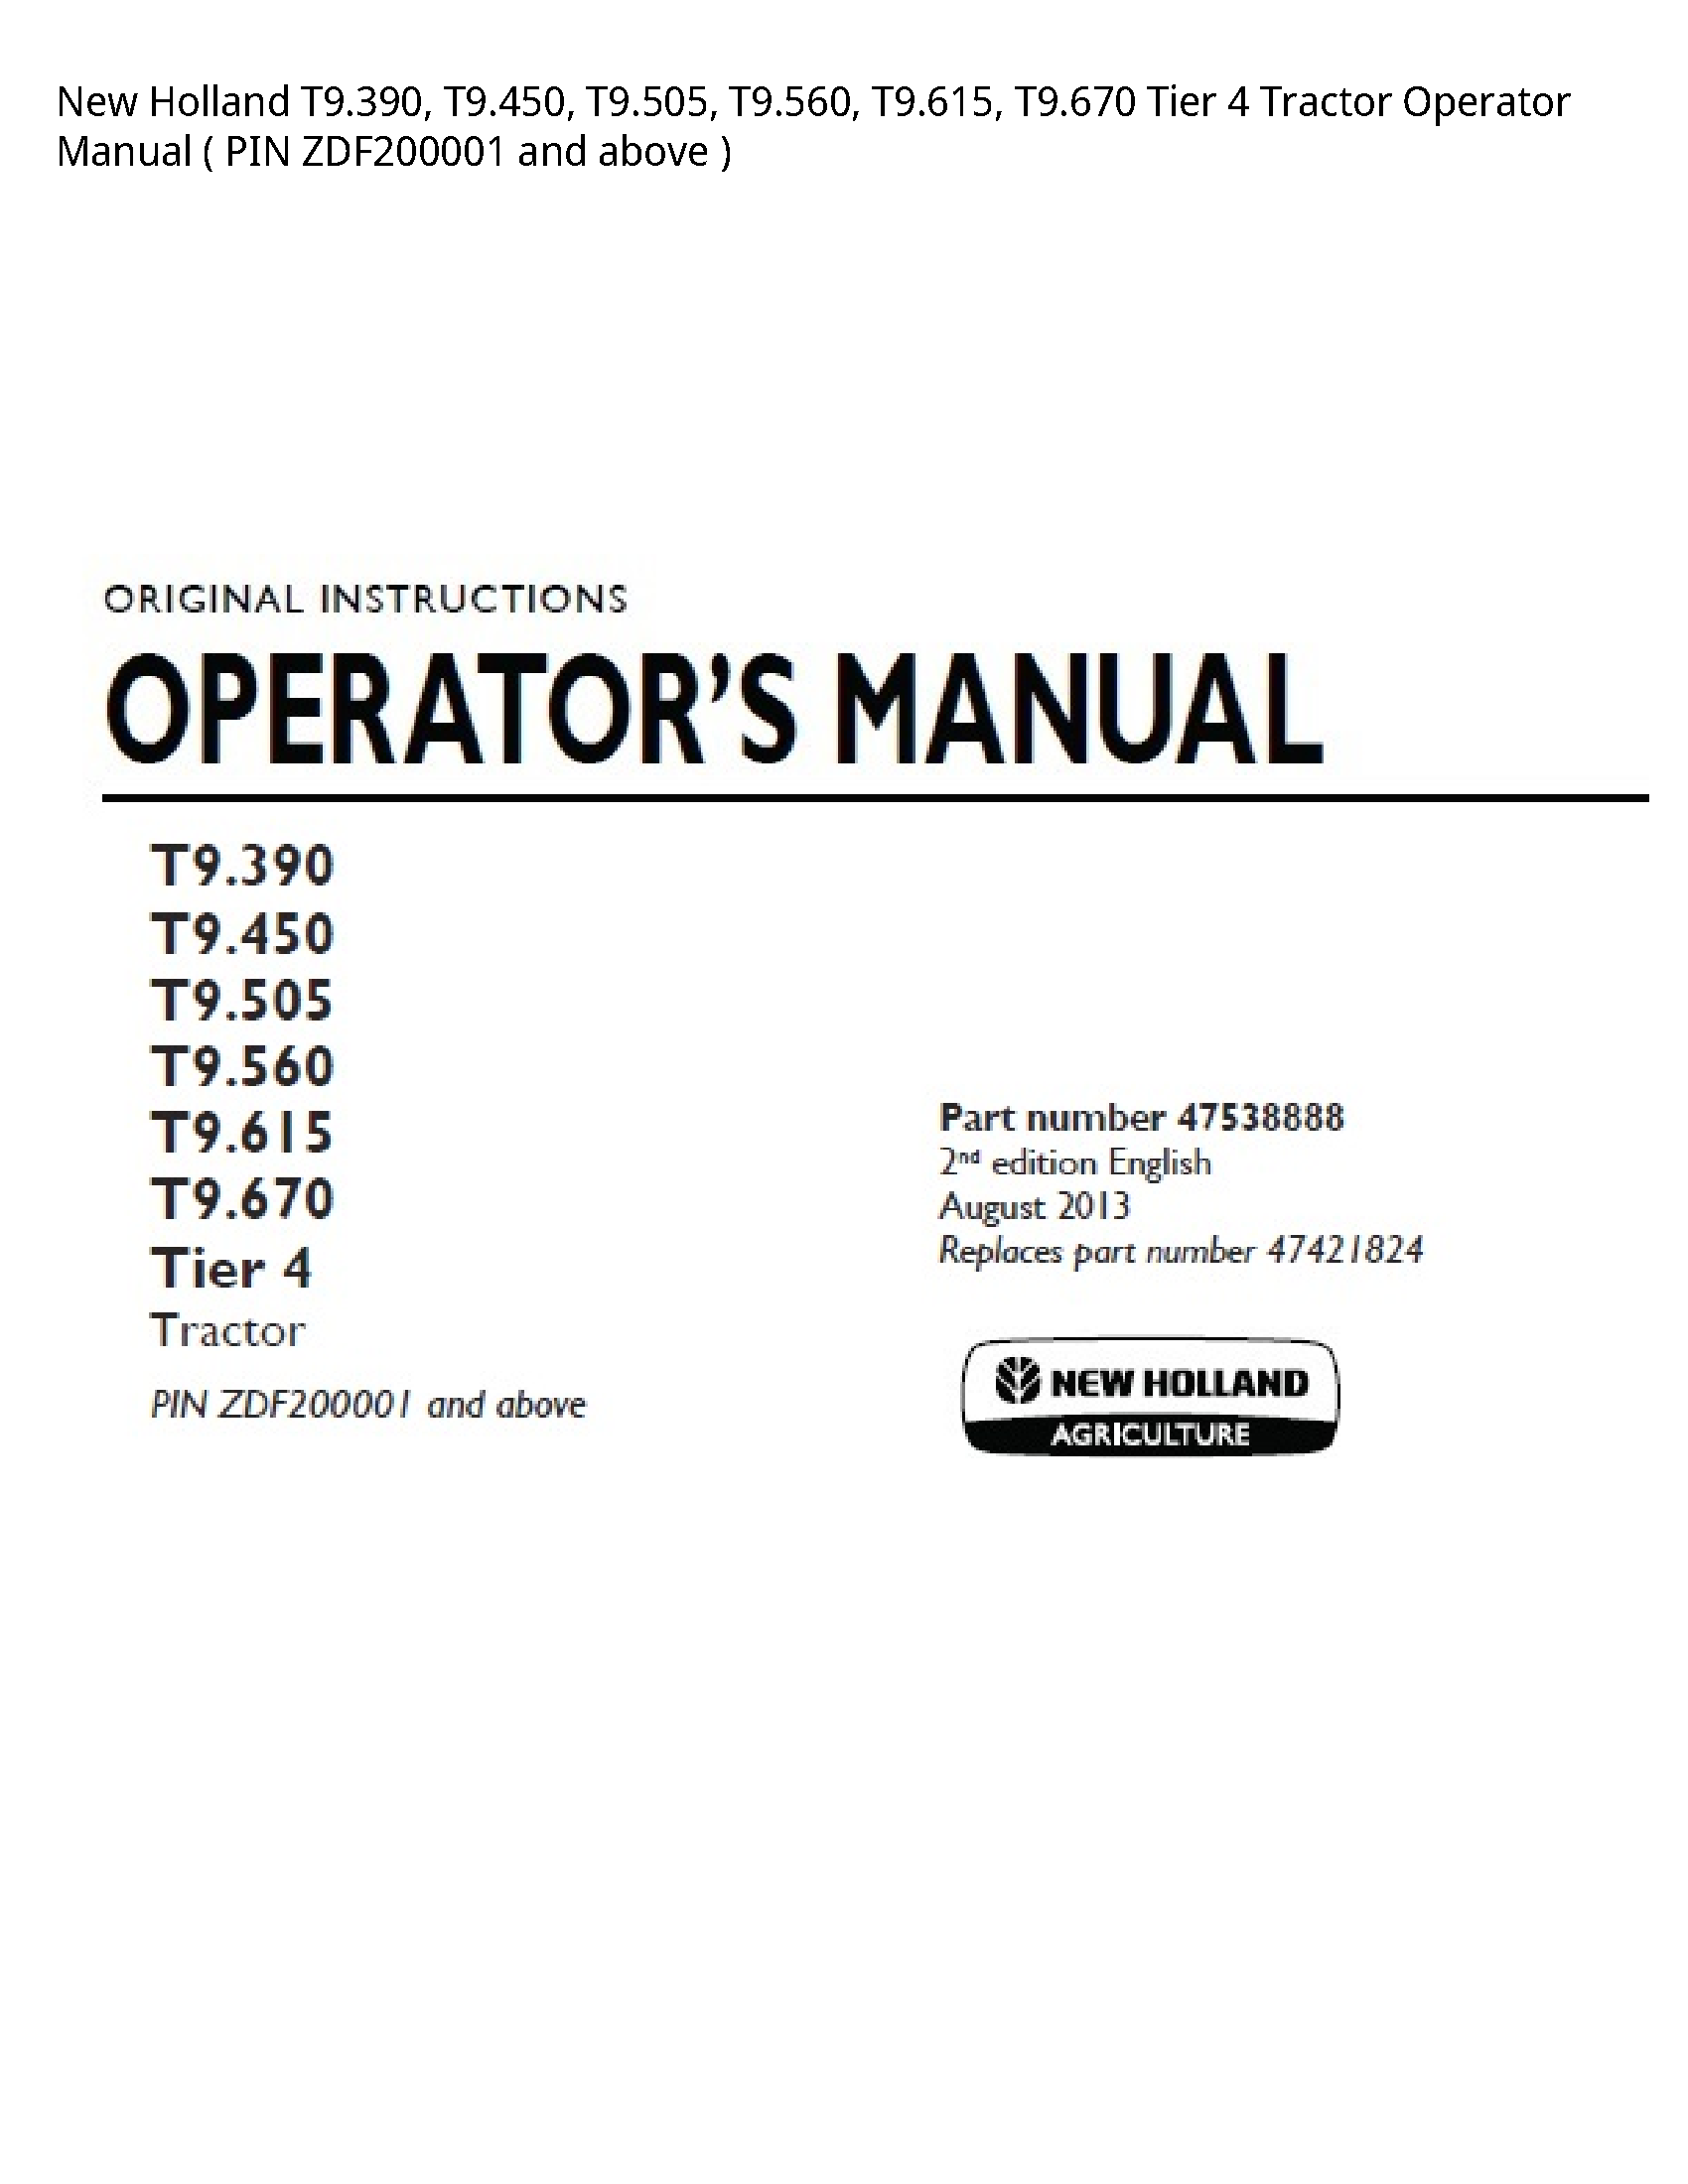 New Holland T9.390 Tier Tractor Operator manual